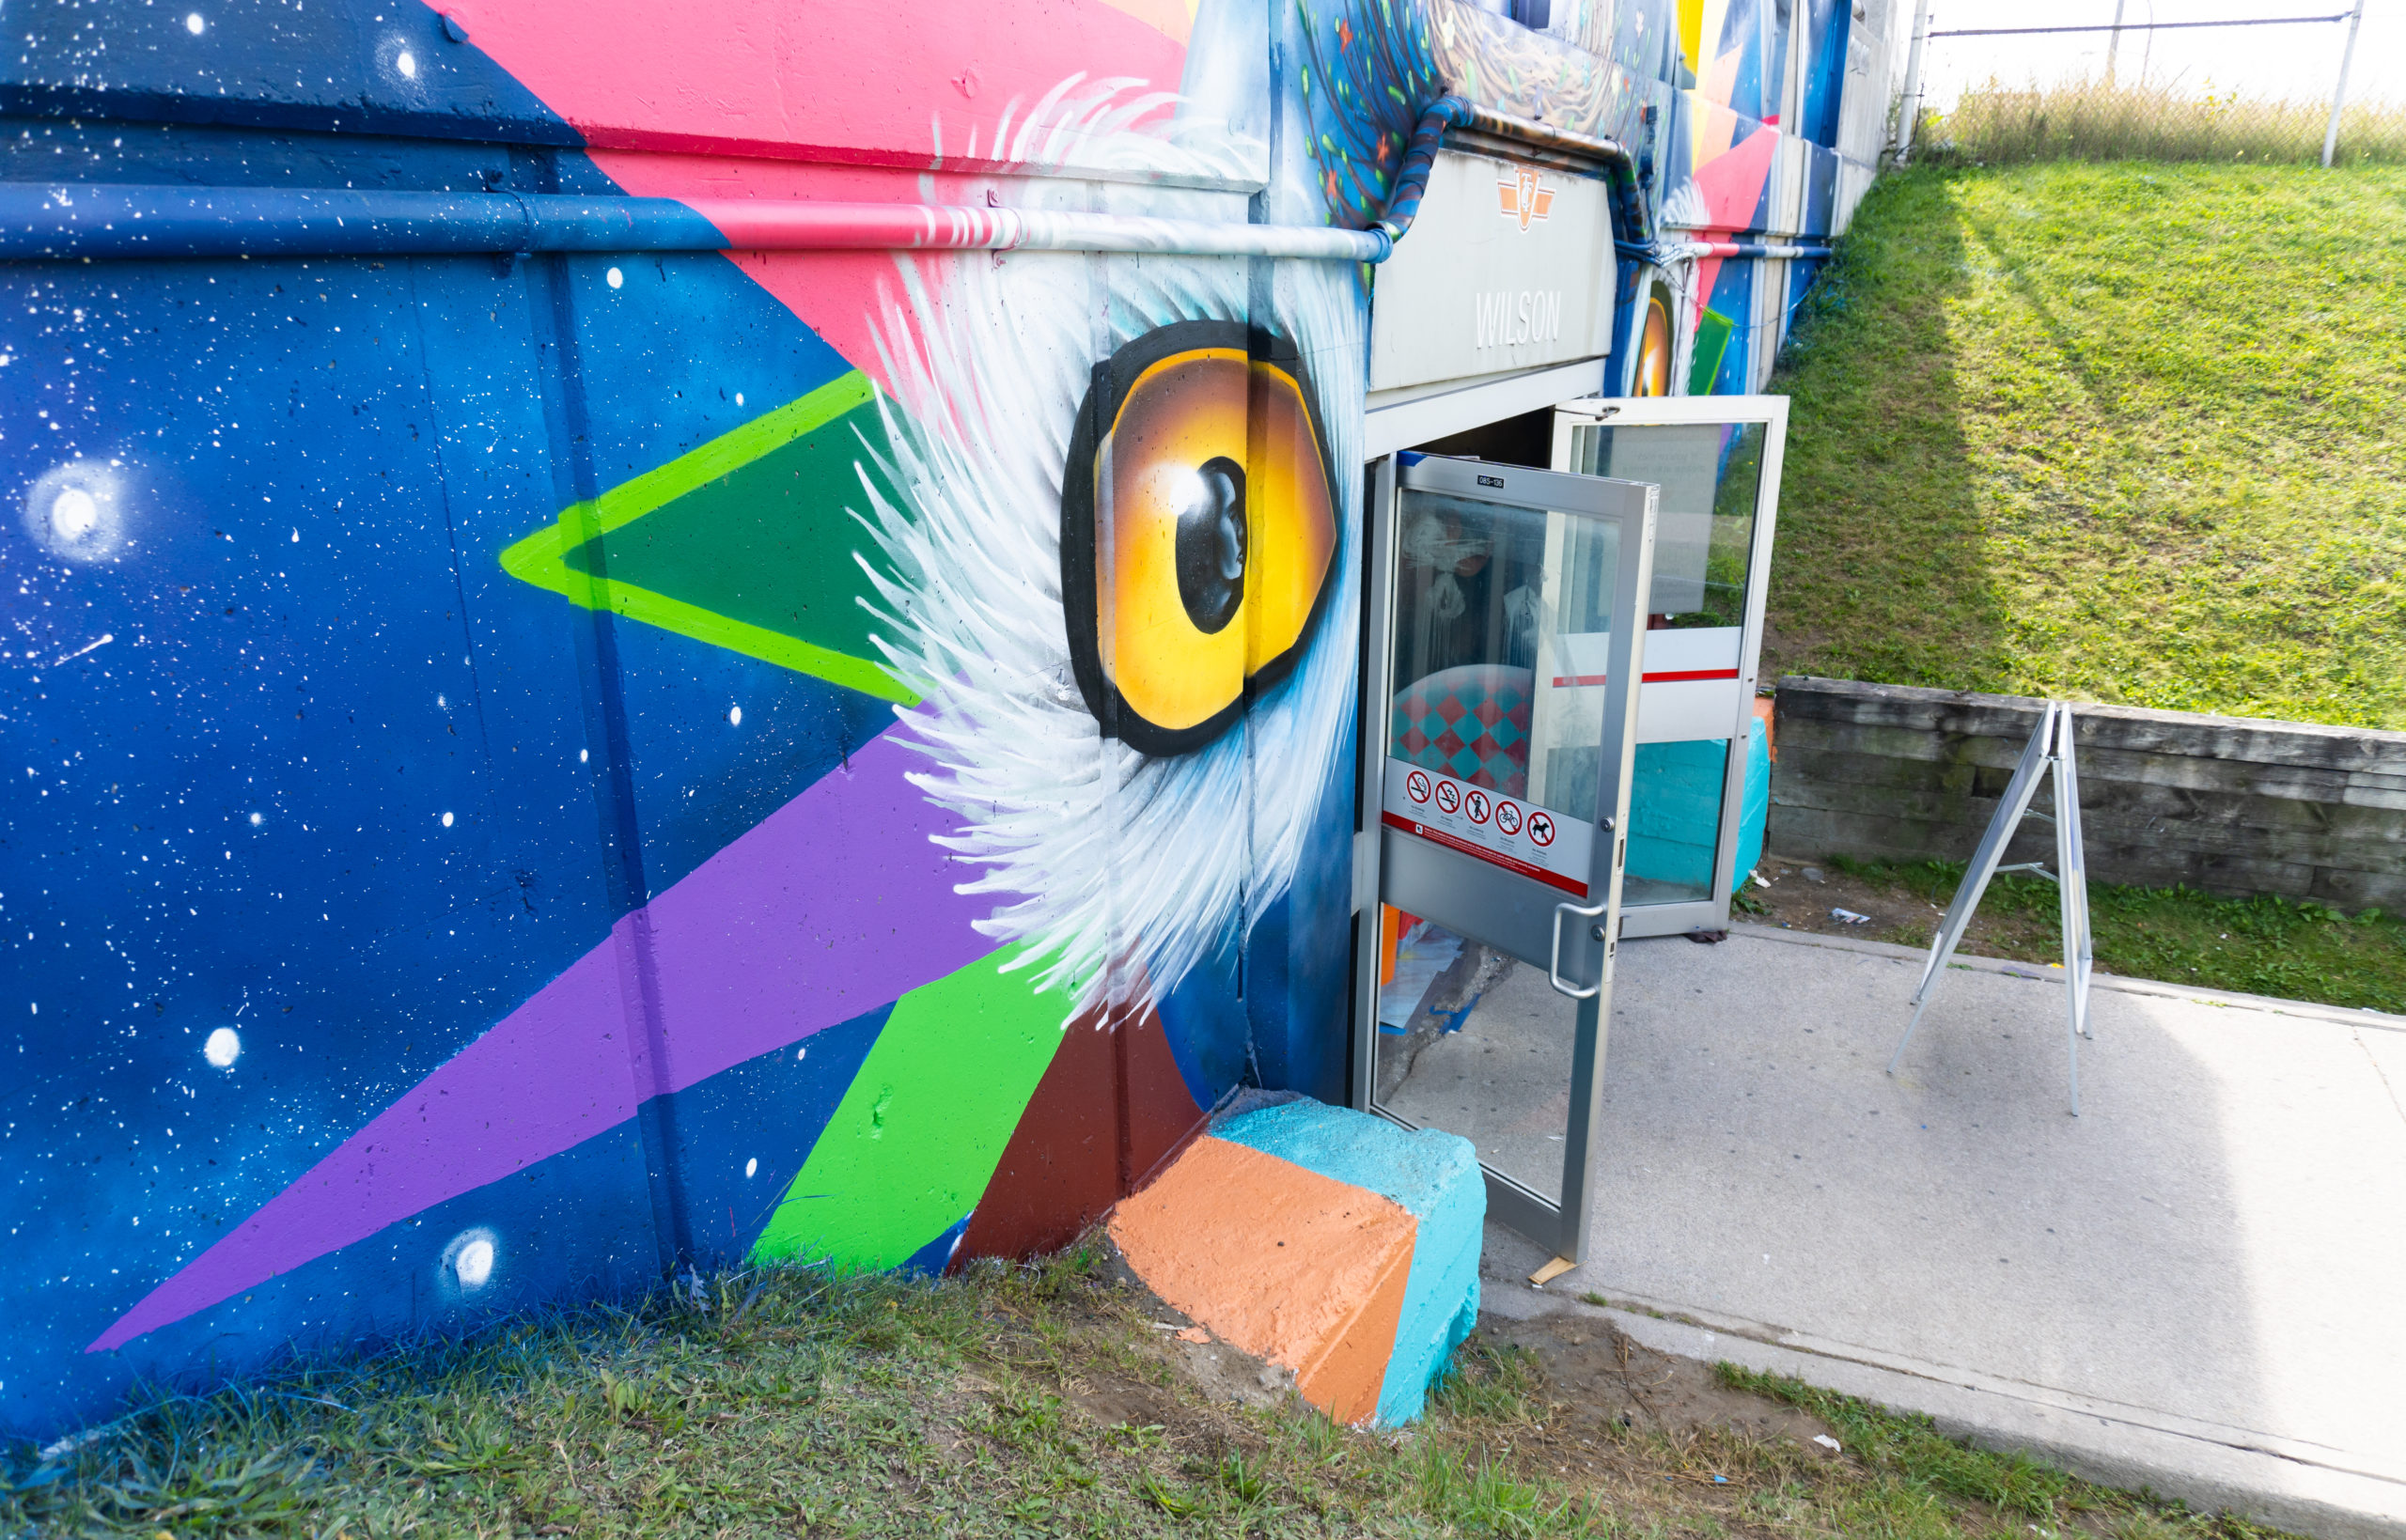 Photo of mural by Shalak Attack at the Tippett Rd entrance, doors are open and the photo is taken from an incline on the left side. The mural features the eyes of a snowy owl, the earth, and geometric colourful shapes.